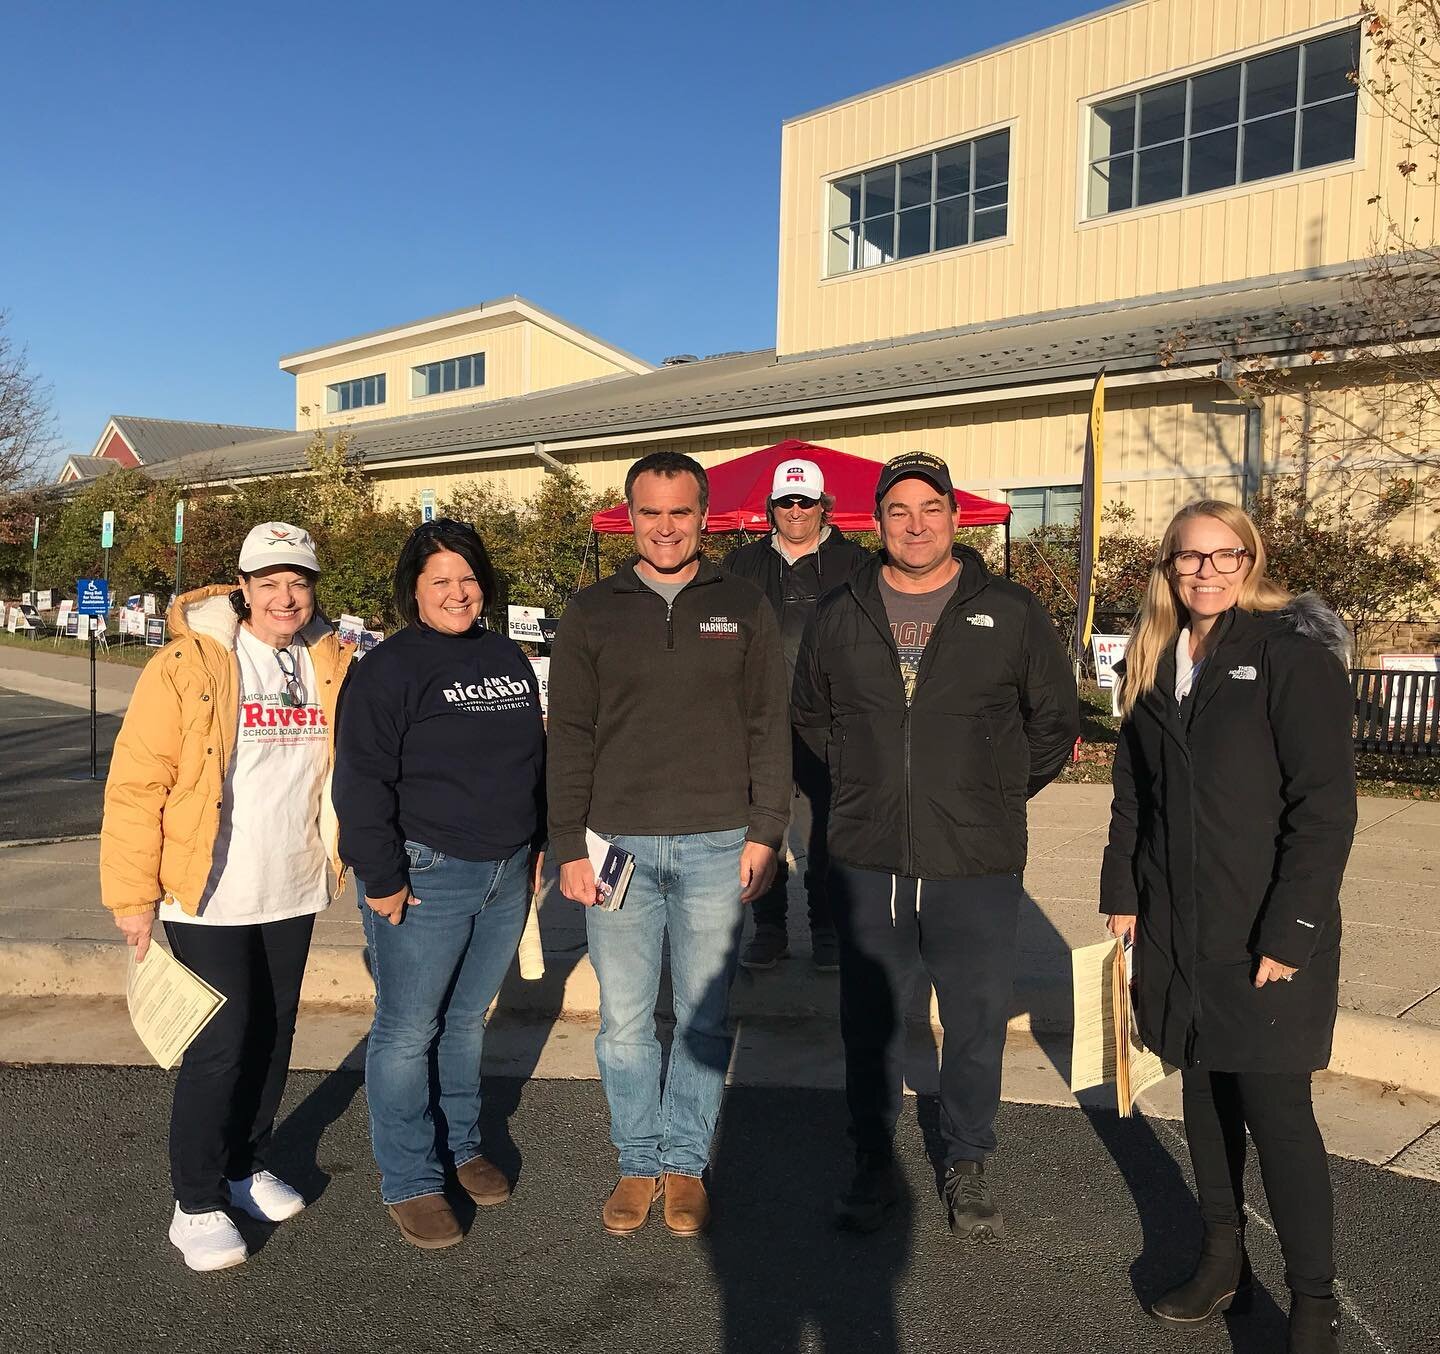 Day 13 meeting voters at the early voting sites in Loudoun! Thanks to everyone who is coming to vote early, asking great questions, and bringing friends and family to vote too! #sterlingva #gotv